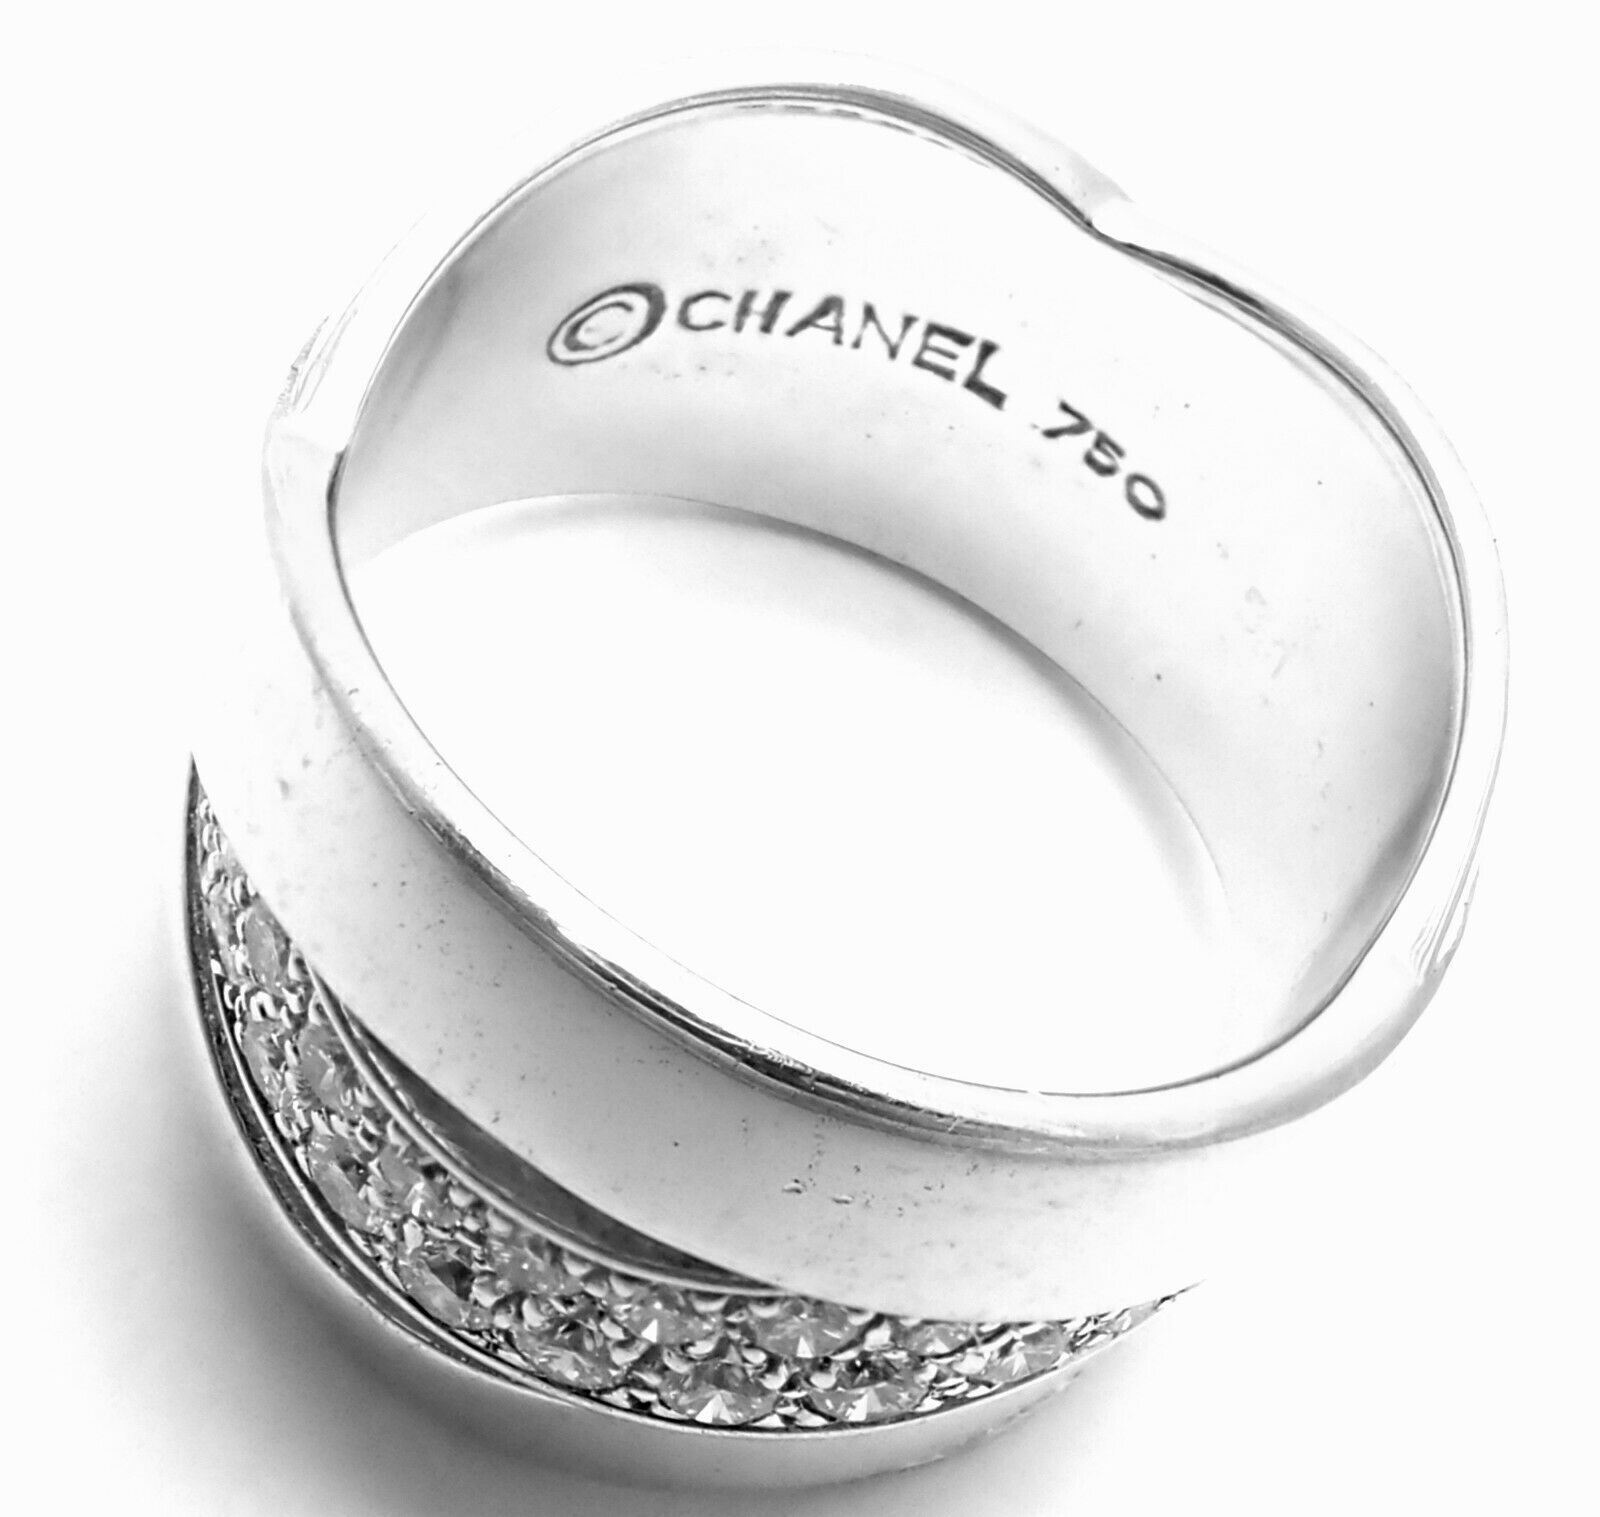 Rare! Authentic! Chanel 18k White Gold Diamond Wide Band Ring